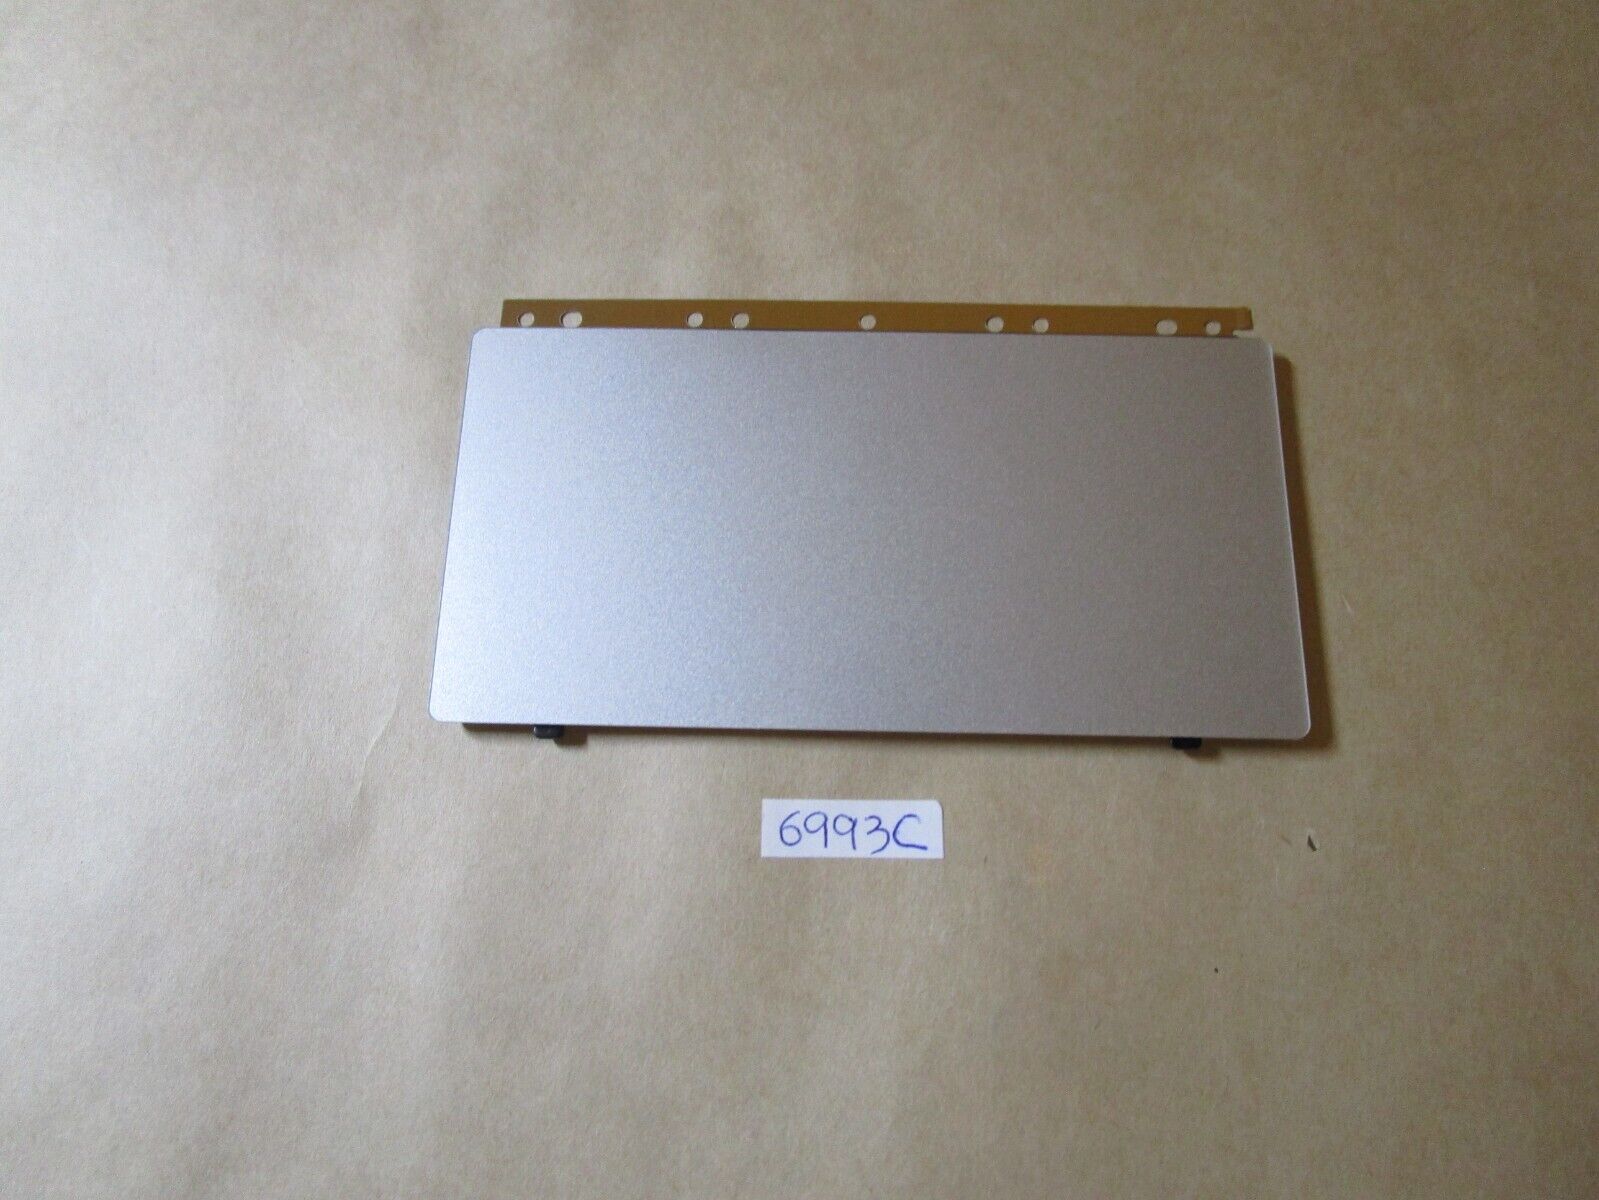 L64897-001 HP Touchpad 